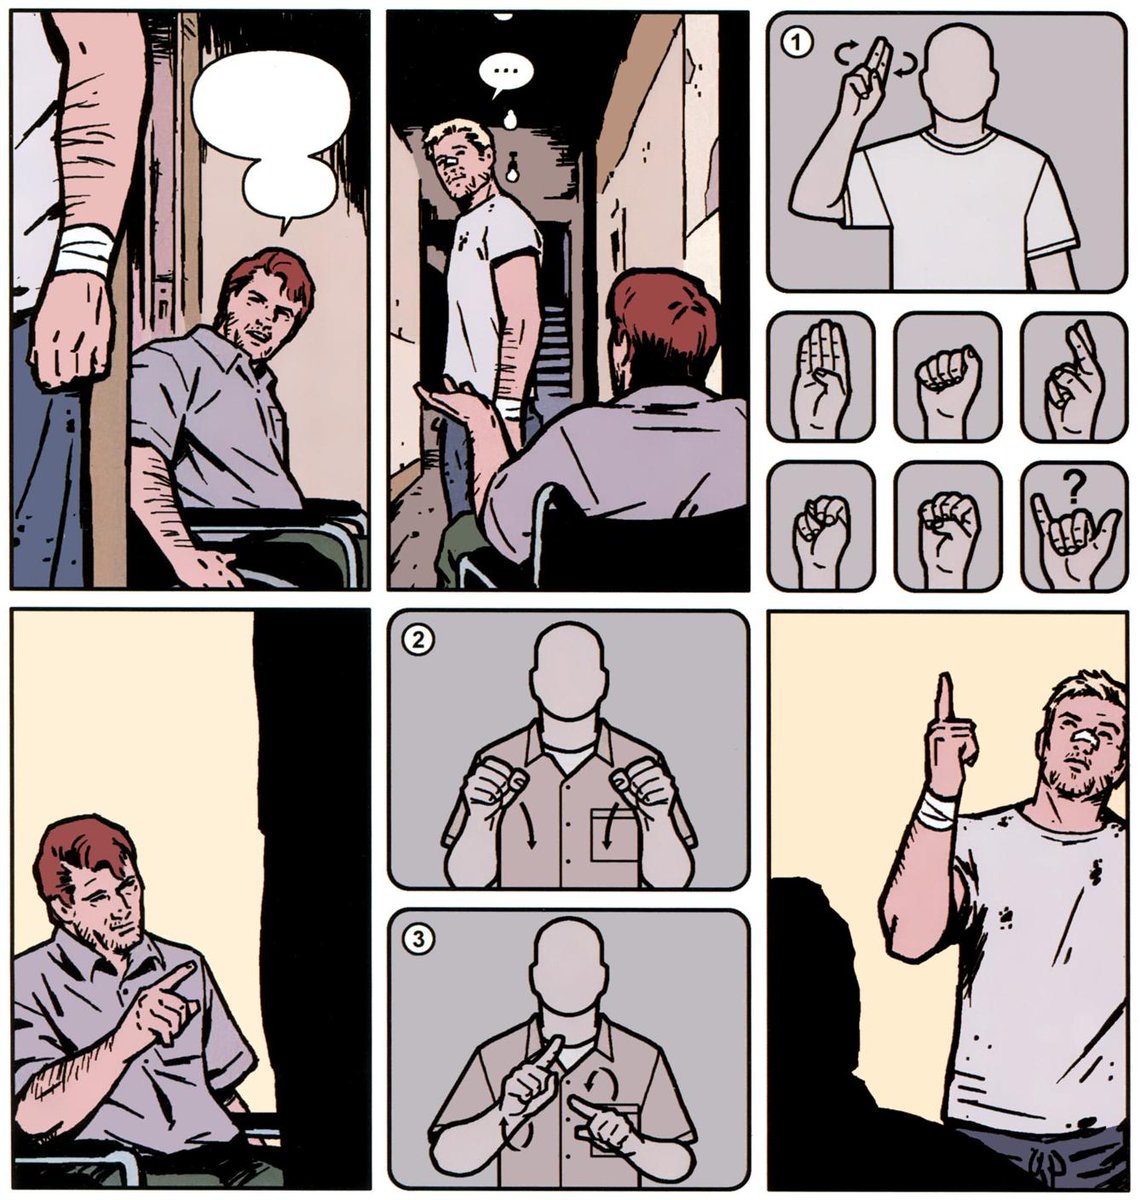 This time, his deafness is a big, very important plot point. In Hawkeye (2012) #19, most dialogues are spoken in ASL and we can see how Clint's lip reading works.